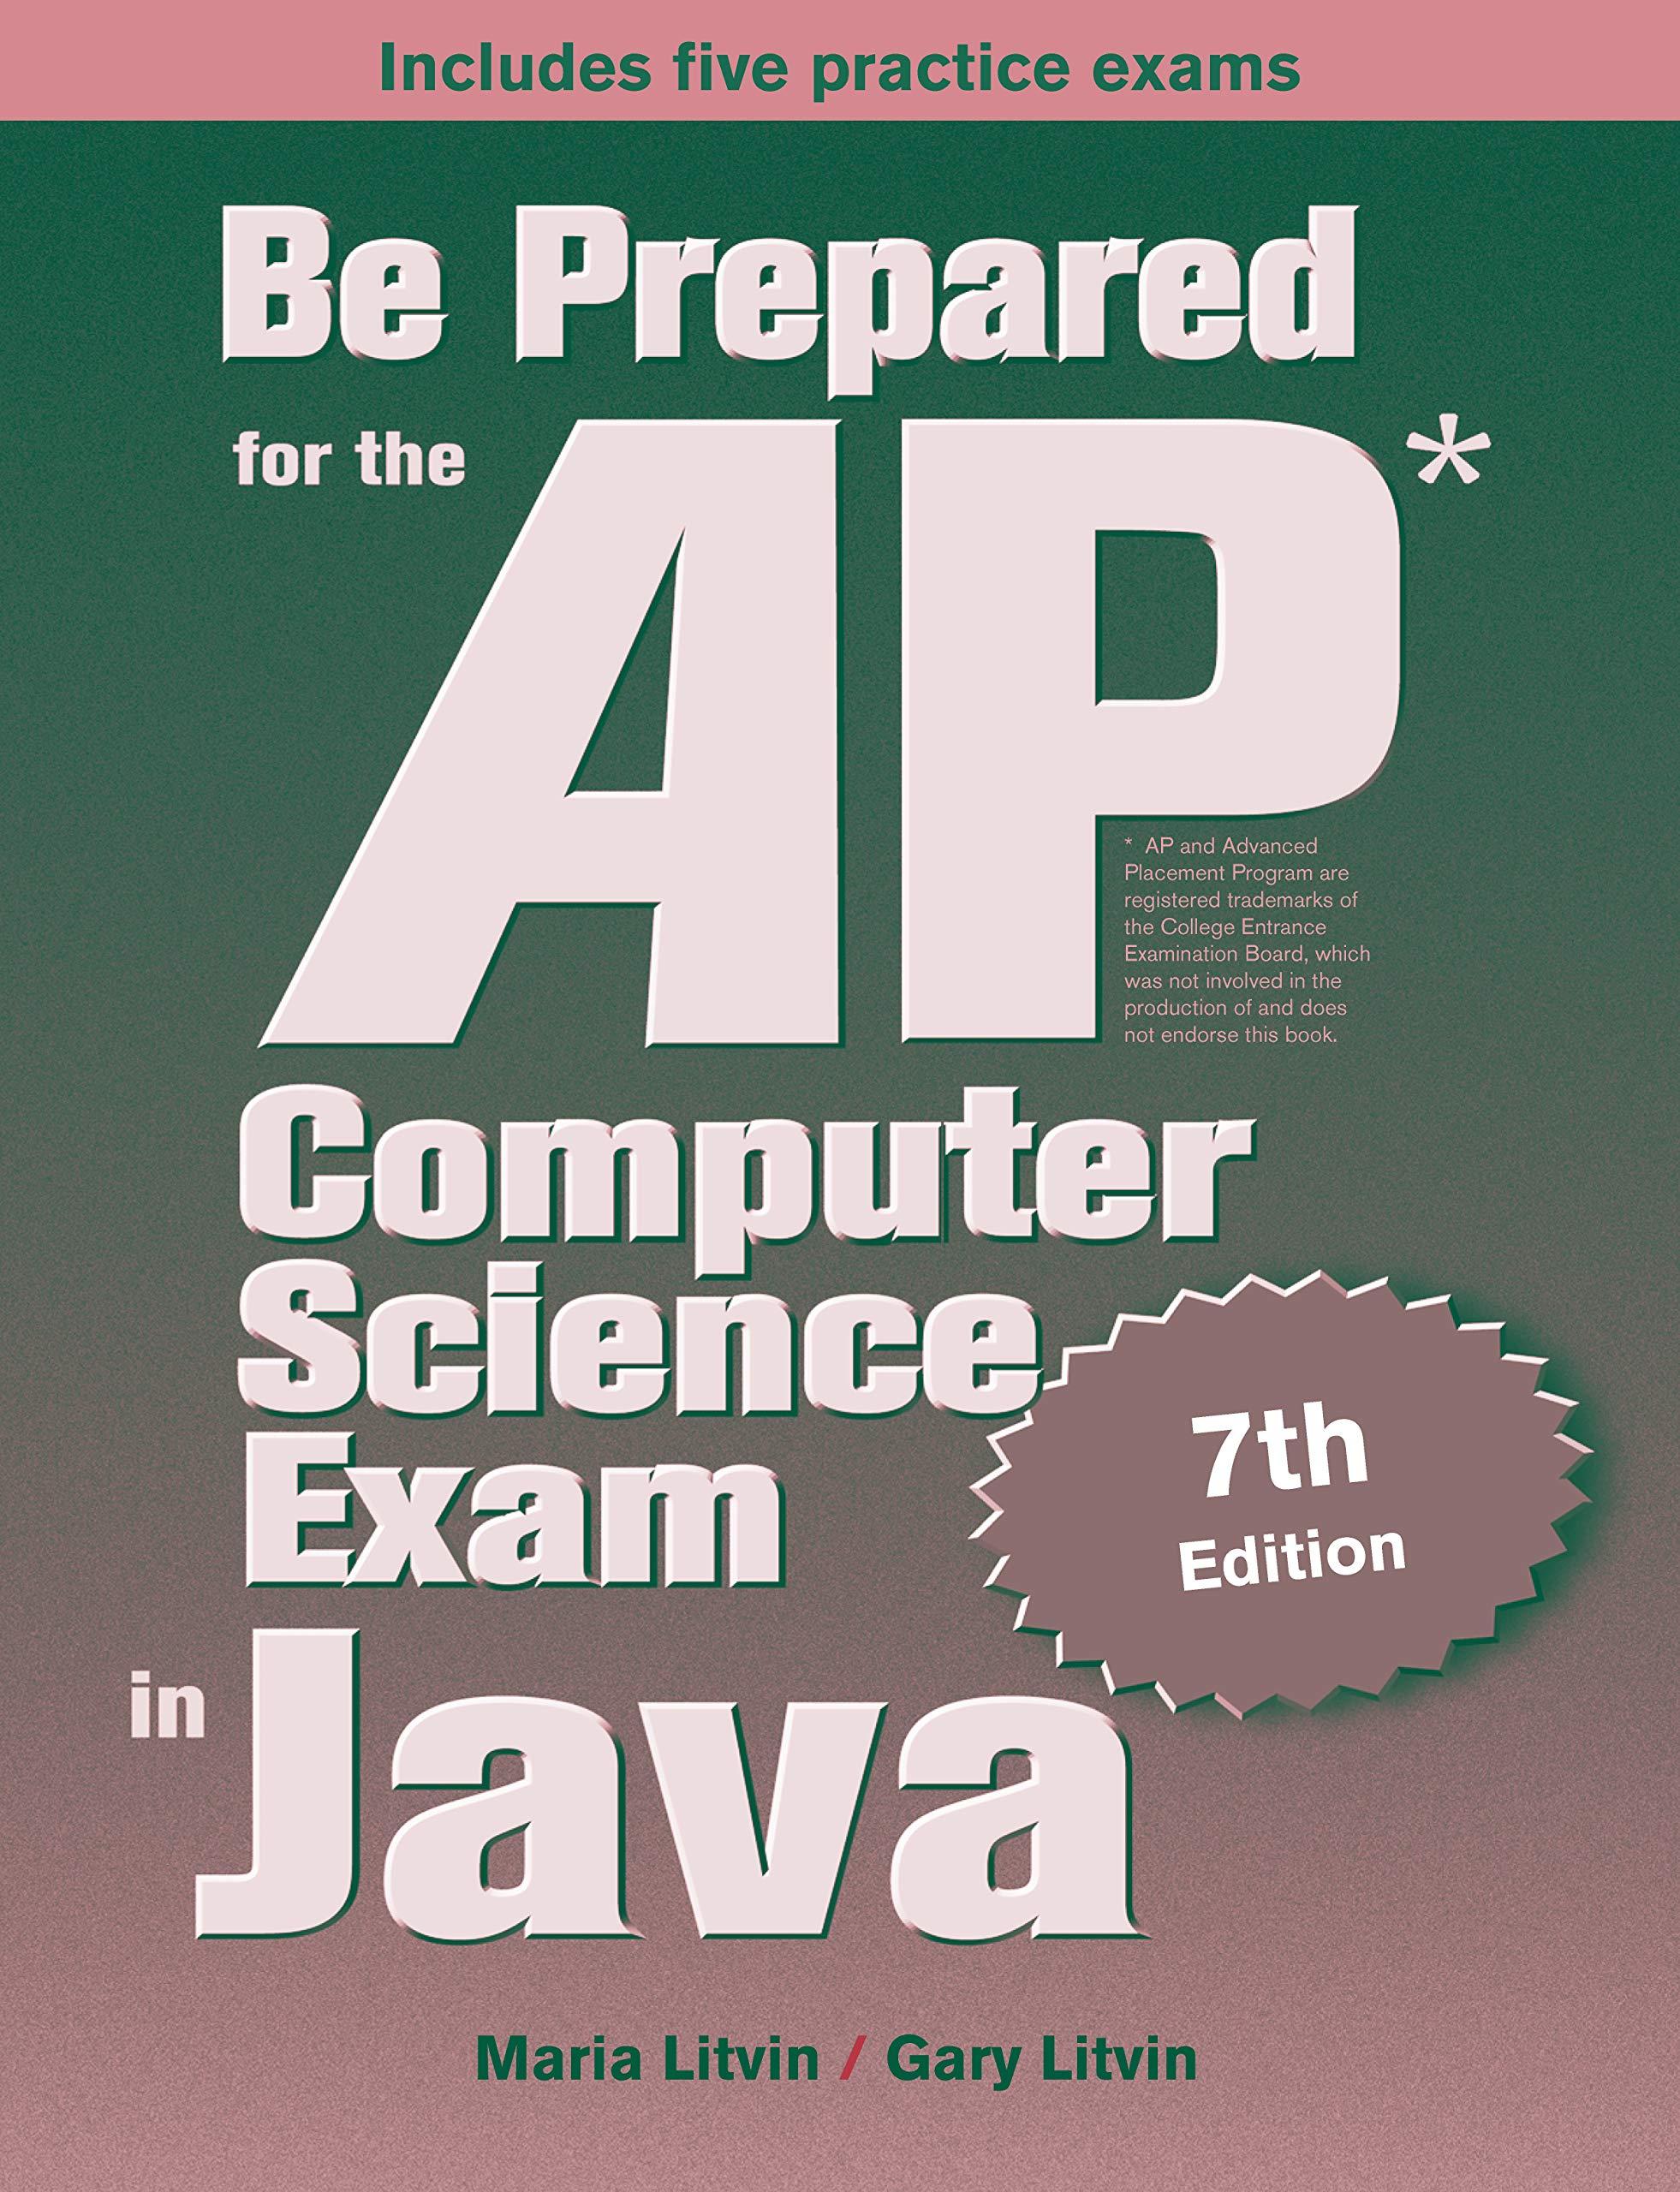 be prepared for the ap computer science exam in java 7th edition maria litvin, gary litvin 0997252863,